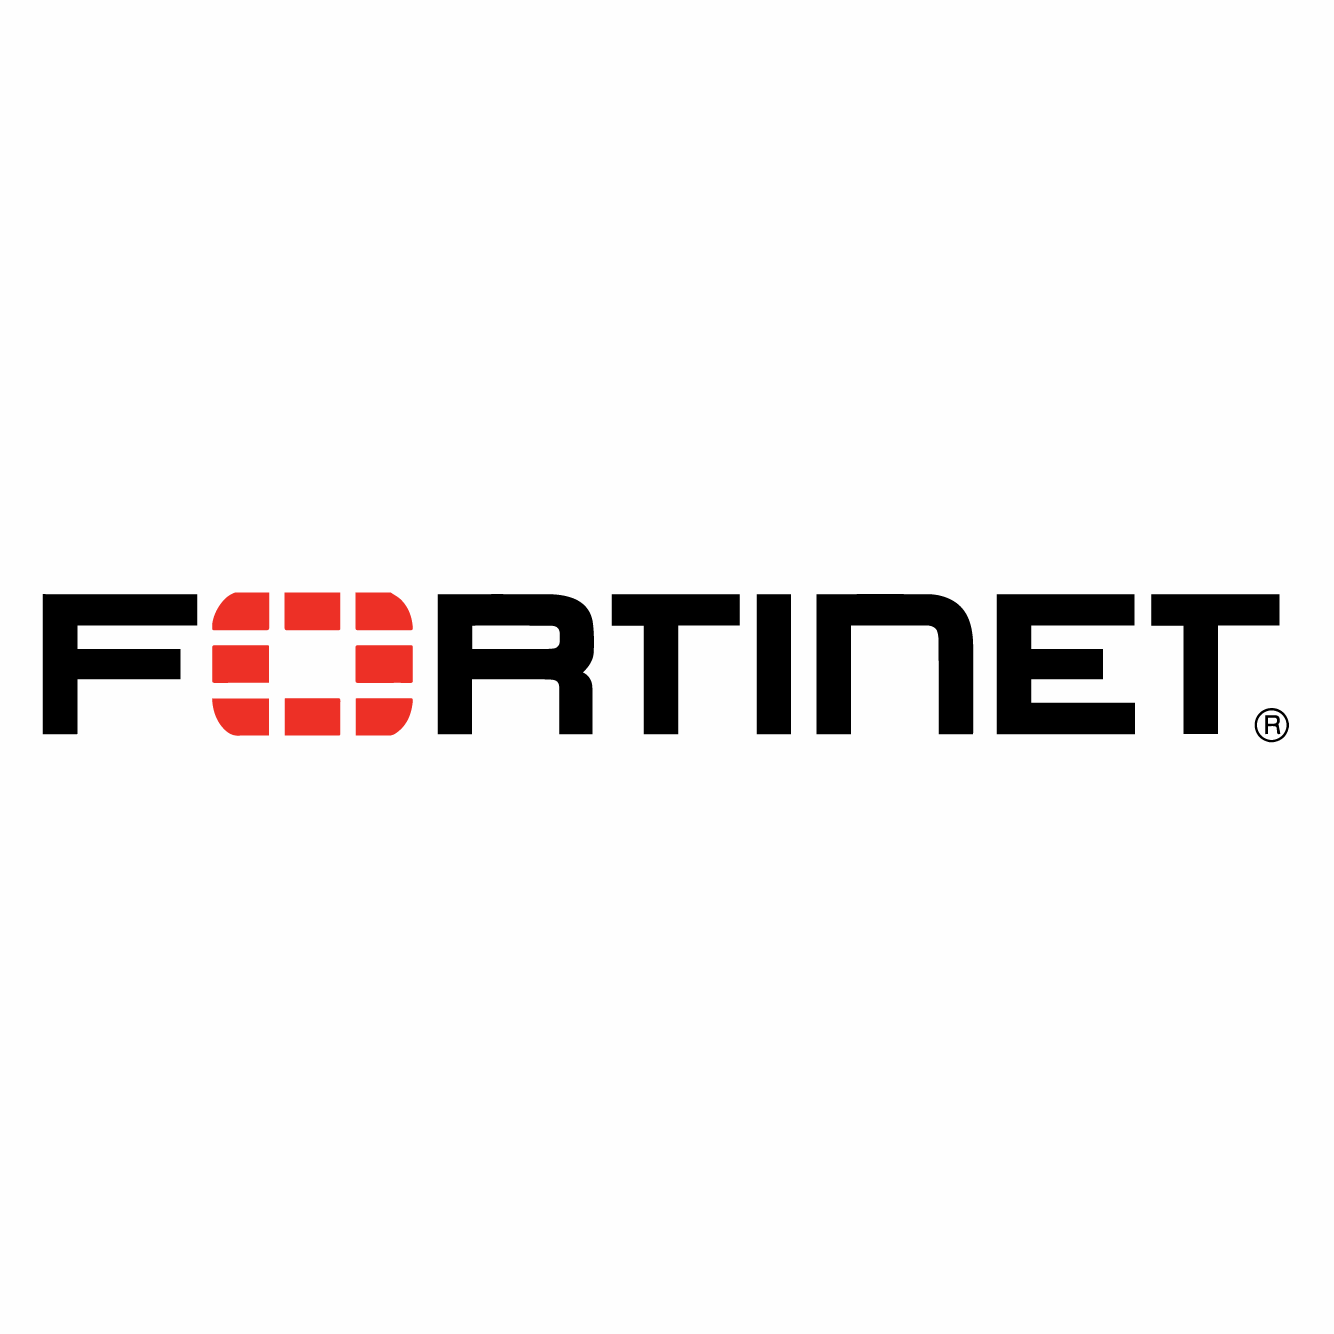 http://securetech.ae/wp-content/uploads/2019/02/05.FORTINET.png